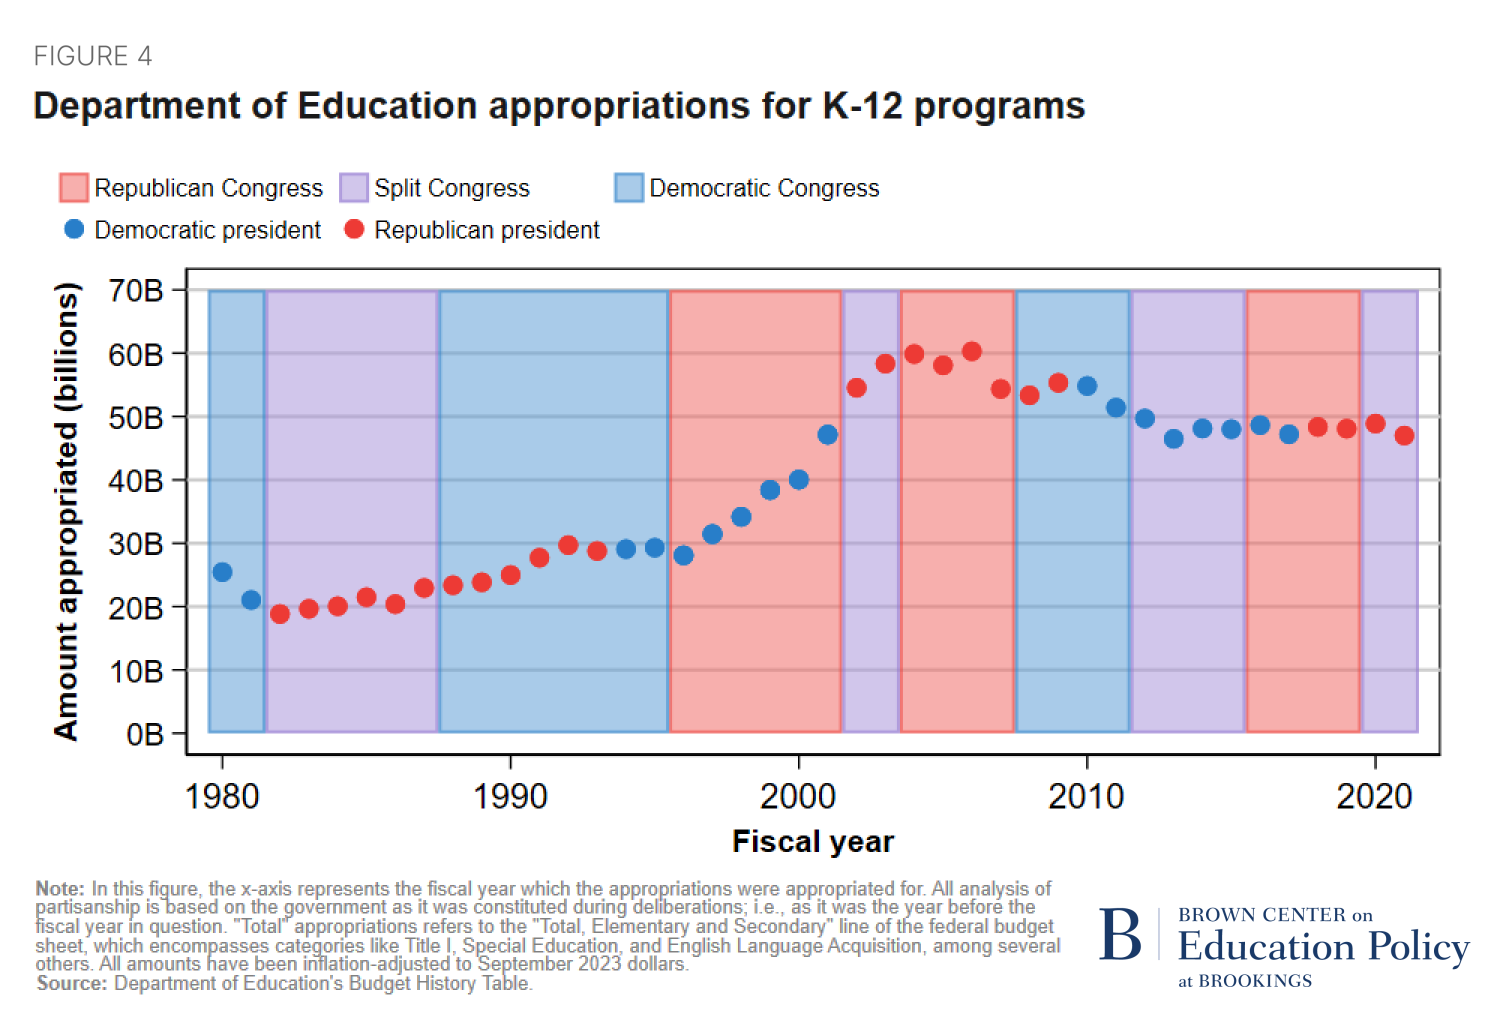 Figure depicting Department of Education appropriations for K-12 programs